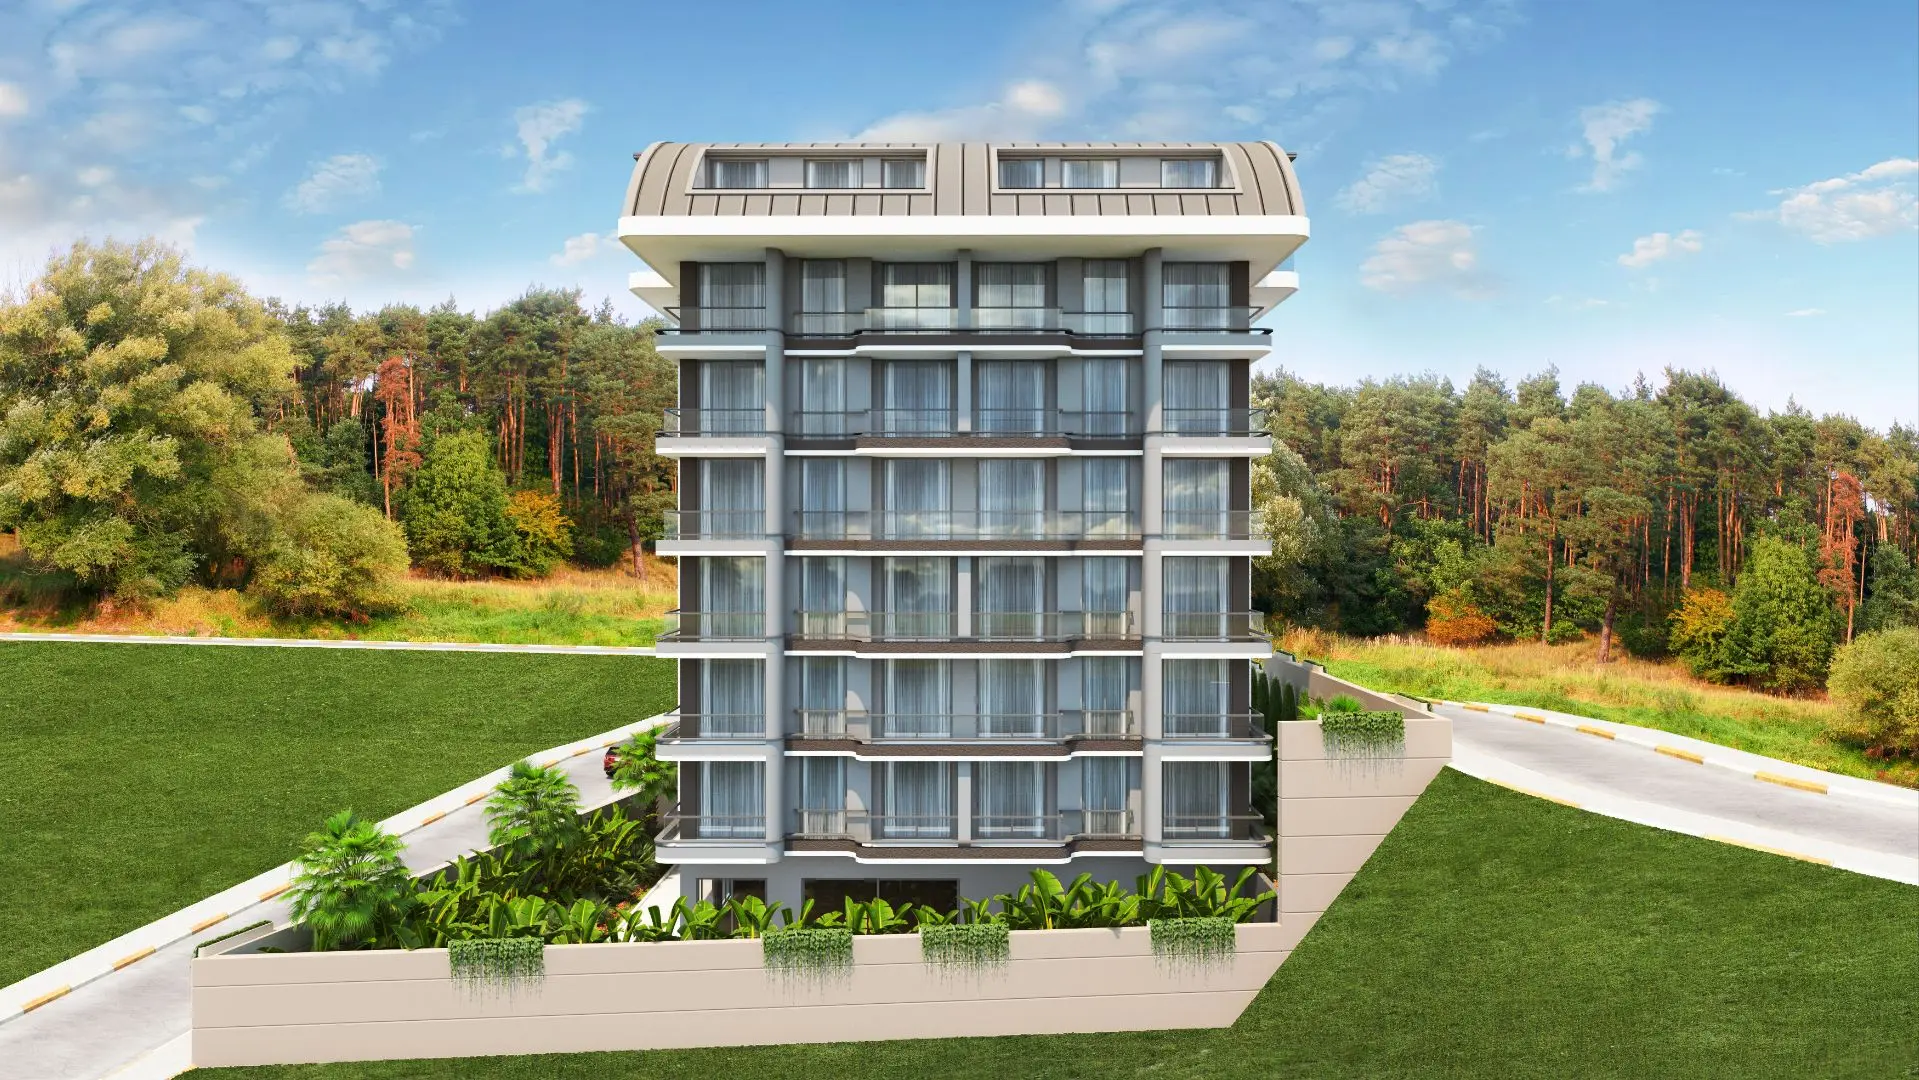 NEW HOUSING PROJECT IN DEMİRTAŞ